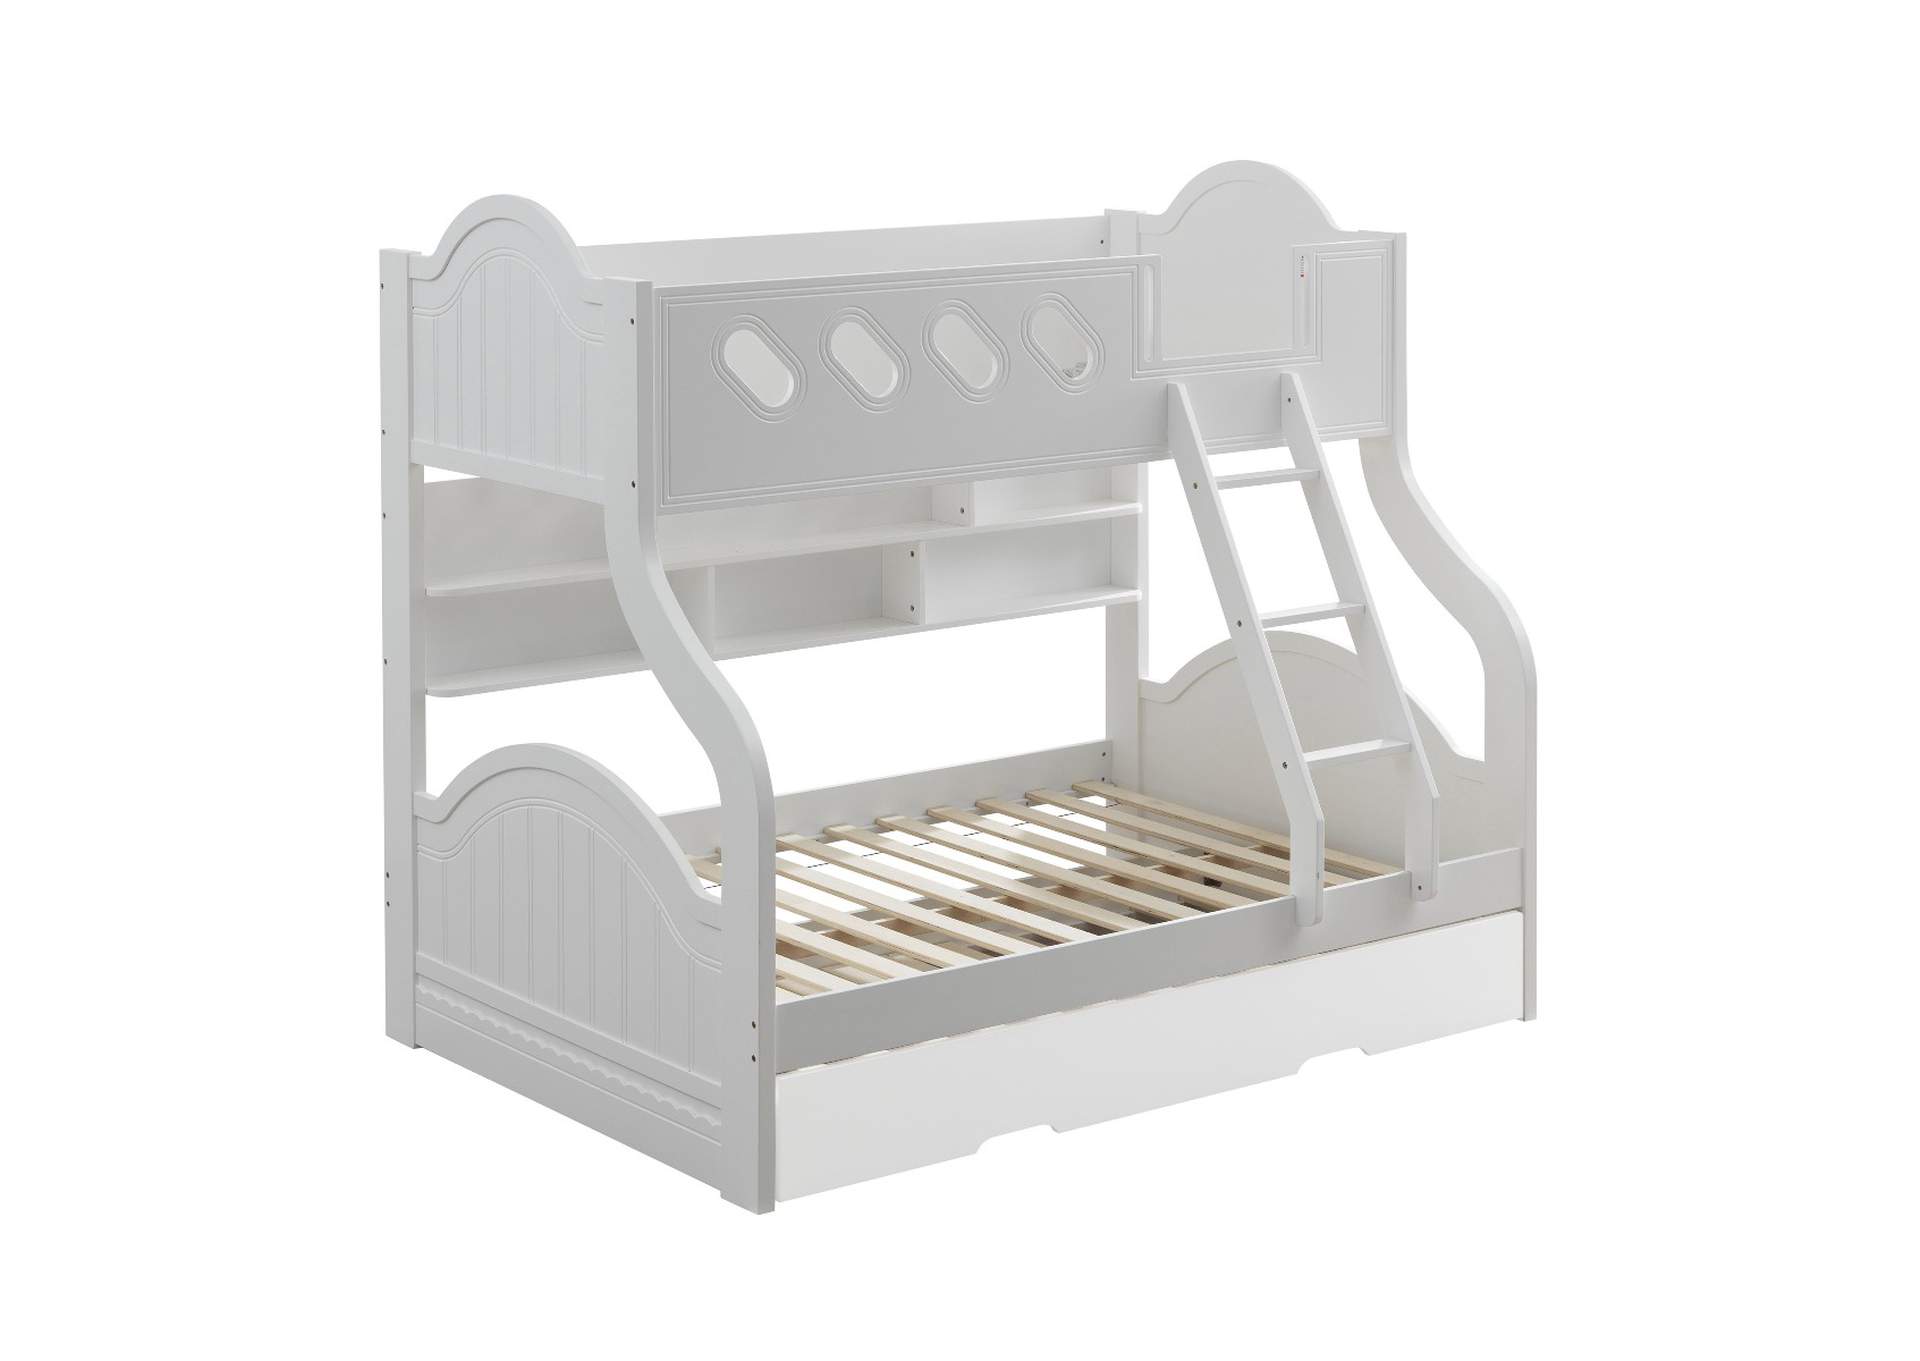 Grover Twin/Full Bunk Bed,Acme